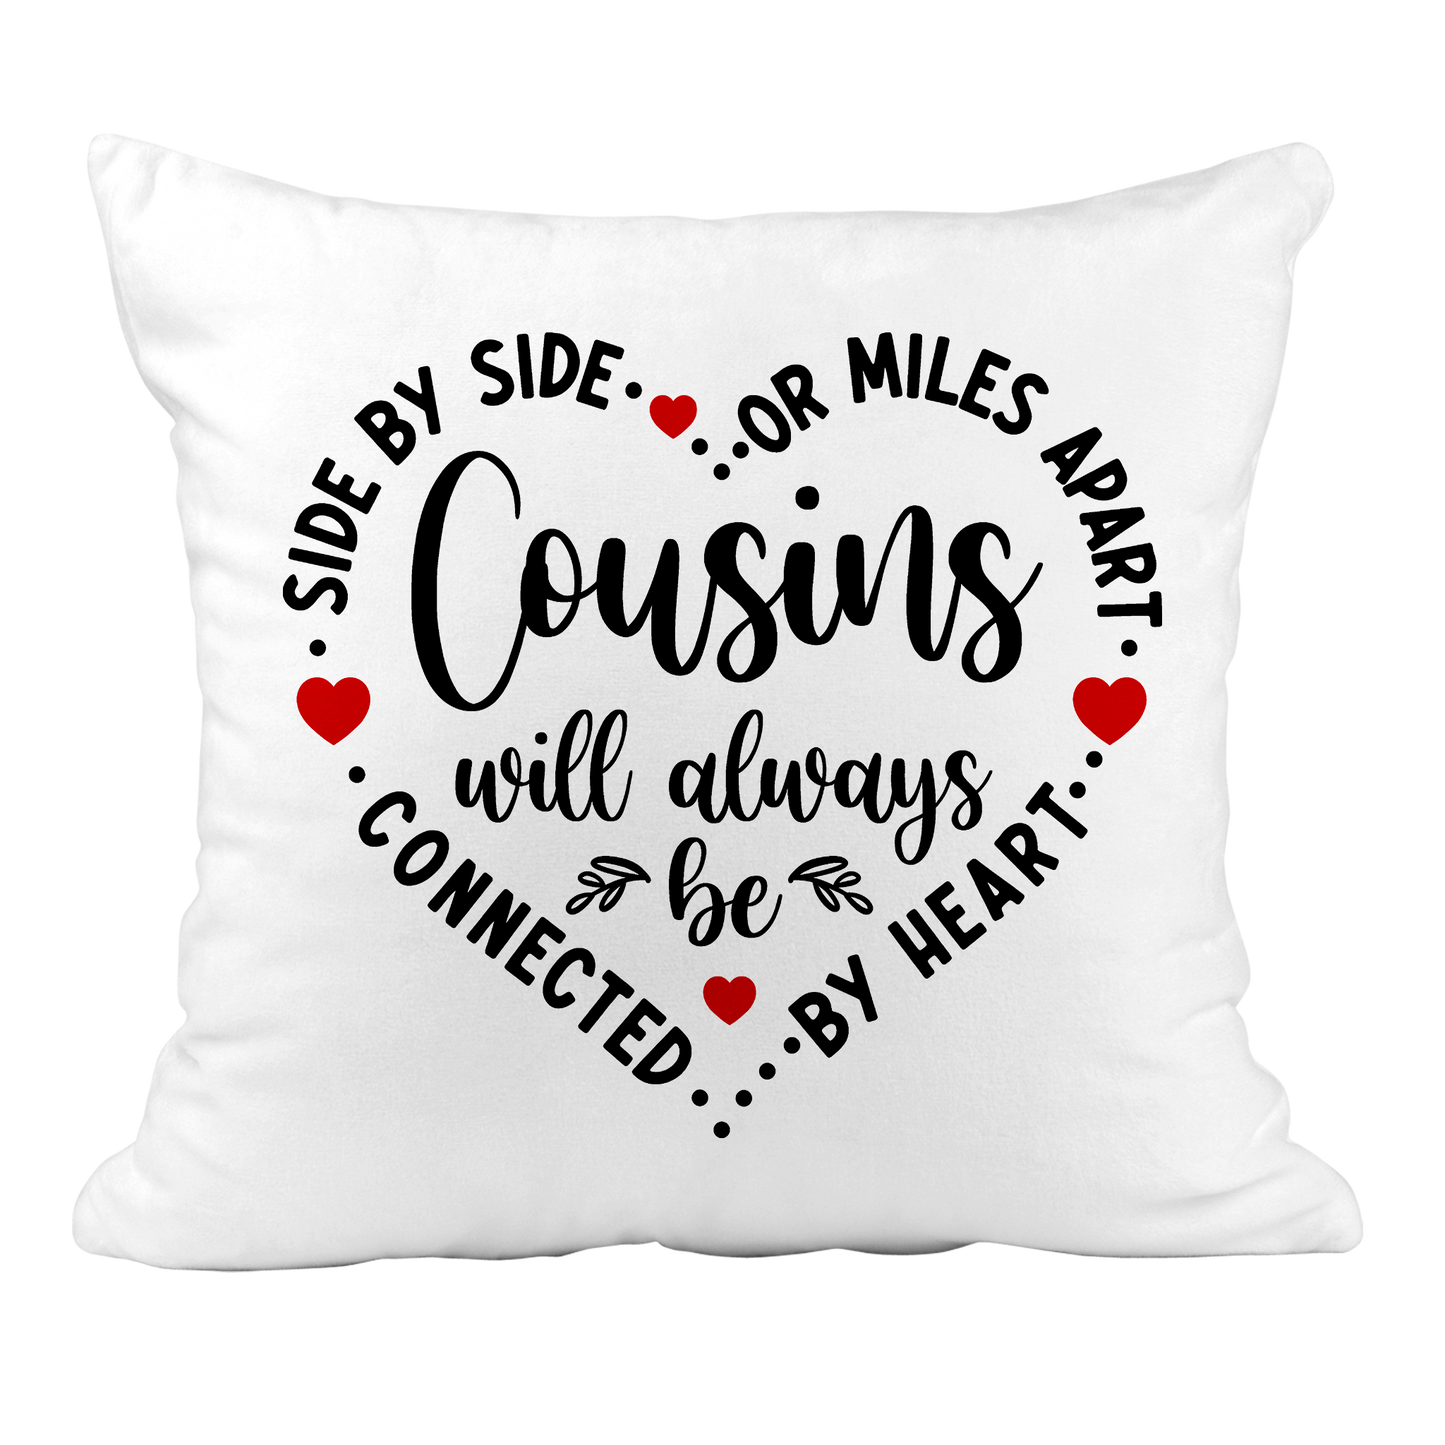 Side by Side or Miles Apart Pillow